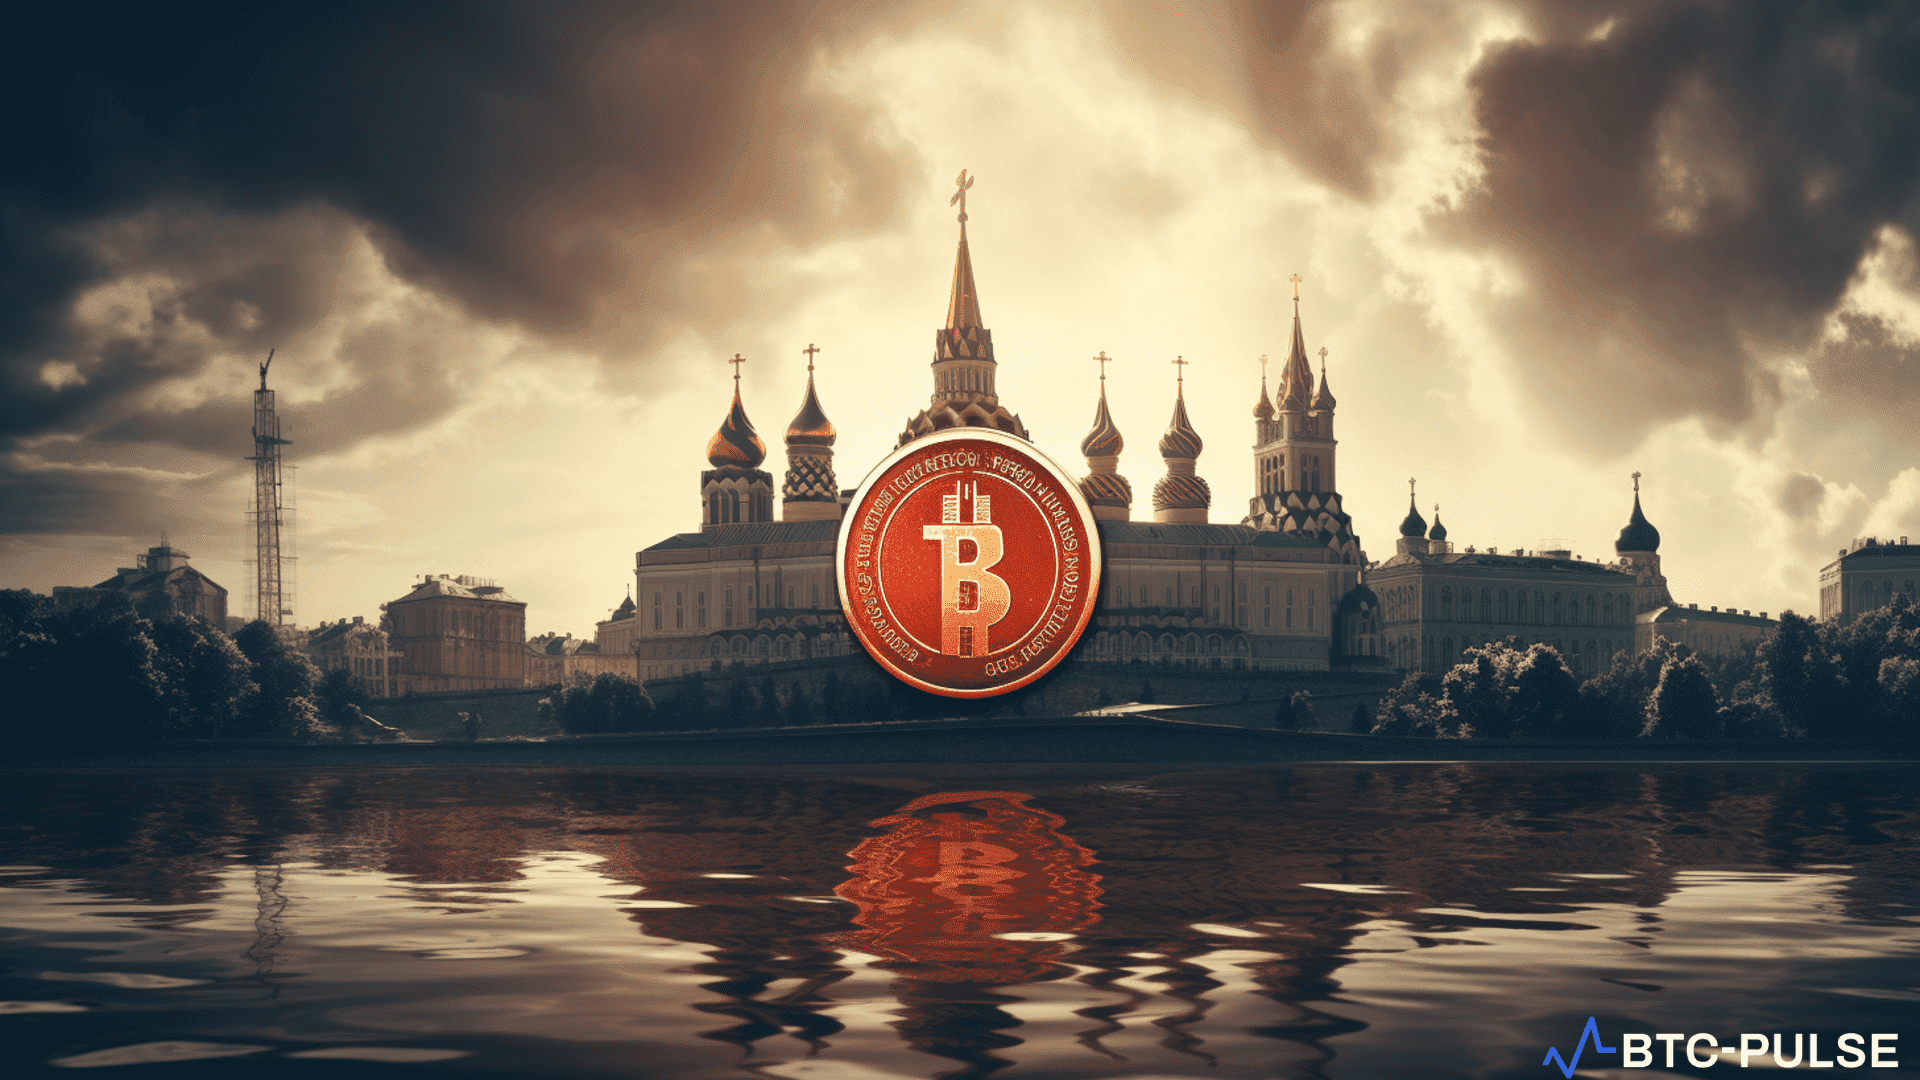 Illustration of a Russian Central Bank building with cryptocurrency symbols in the background, representing the report on financial scams involving crypto in Russia.